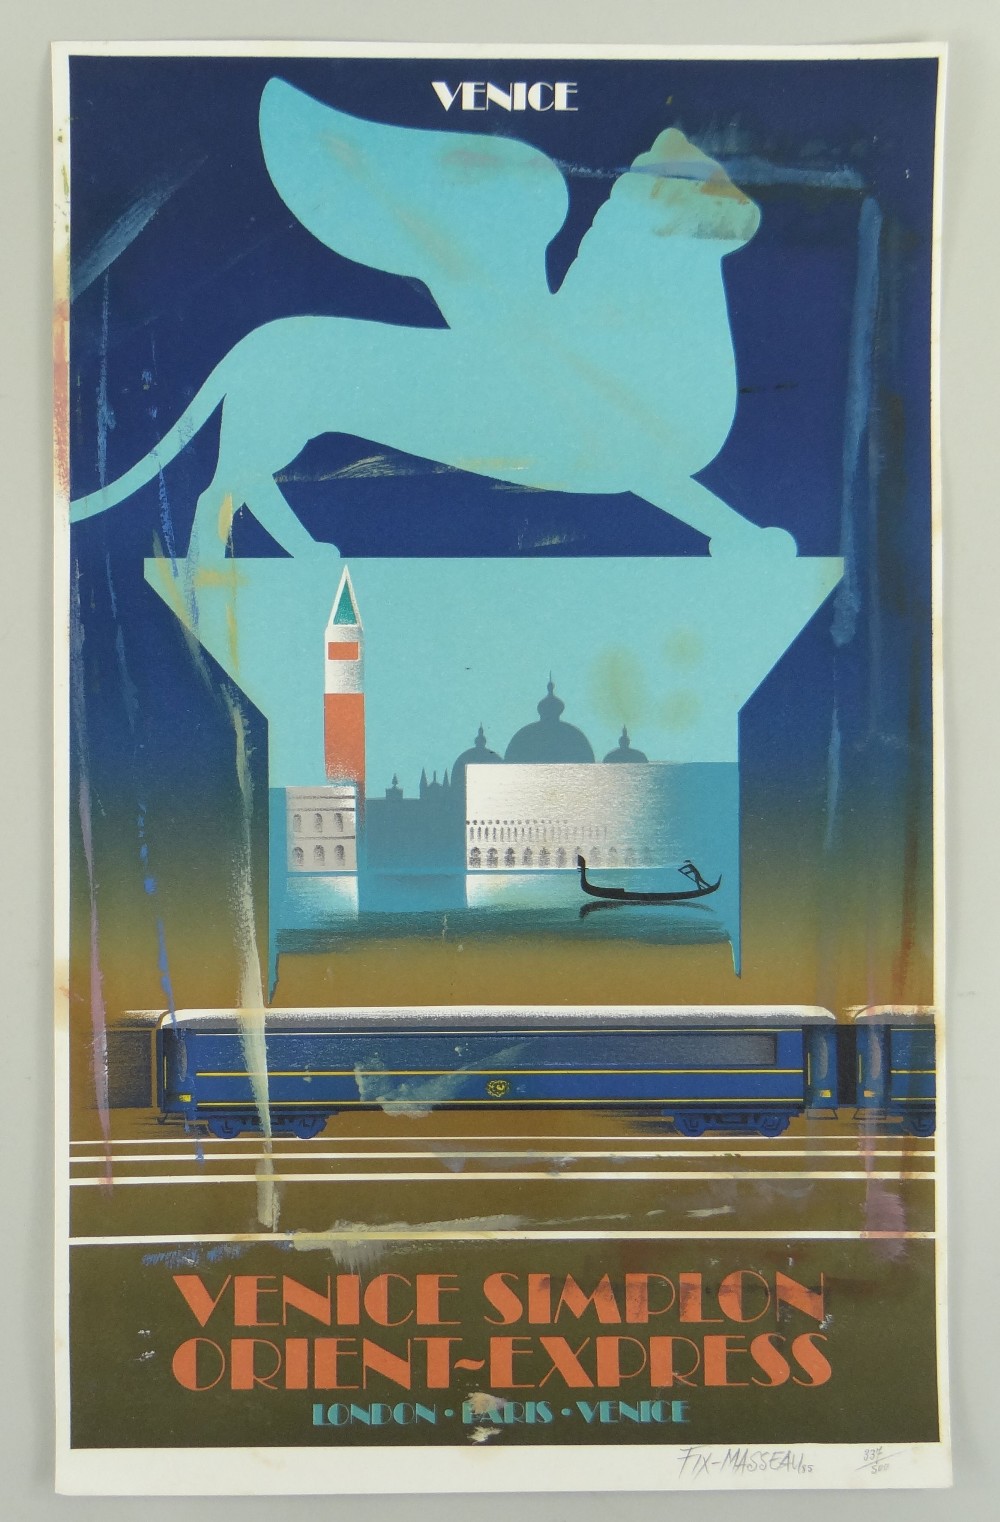 PIERRE FIX-MASSEAU fine boxed set of nine limited edition (337/500) coloured lithographs - Venice - Image 10 of 12